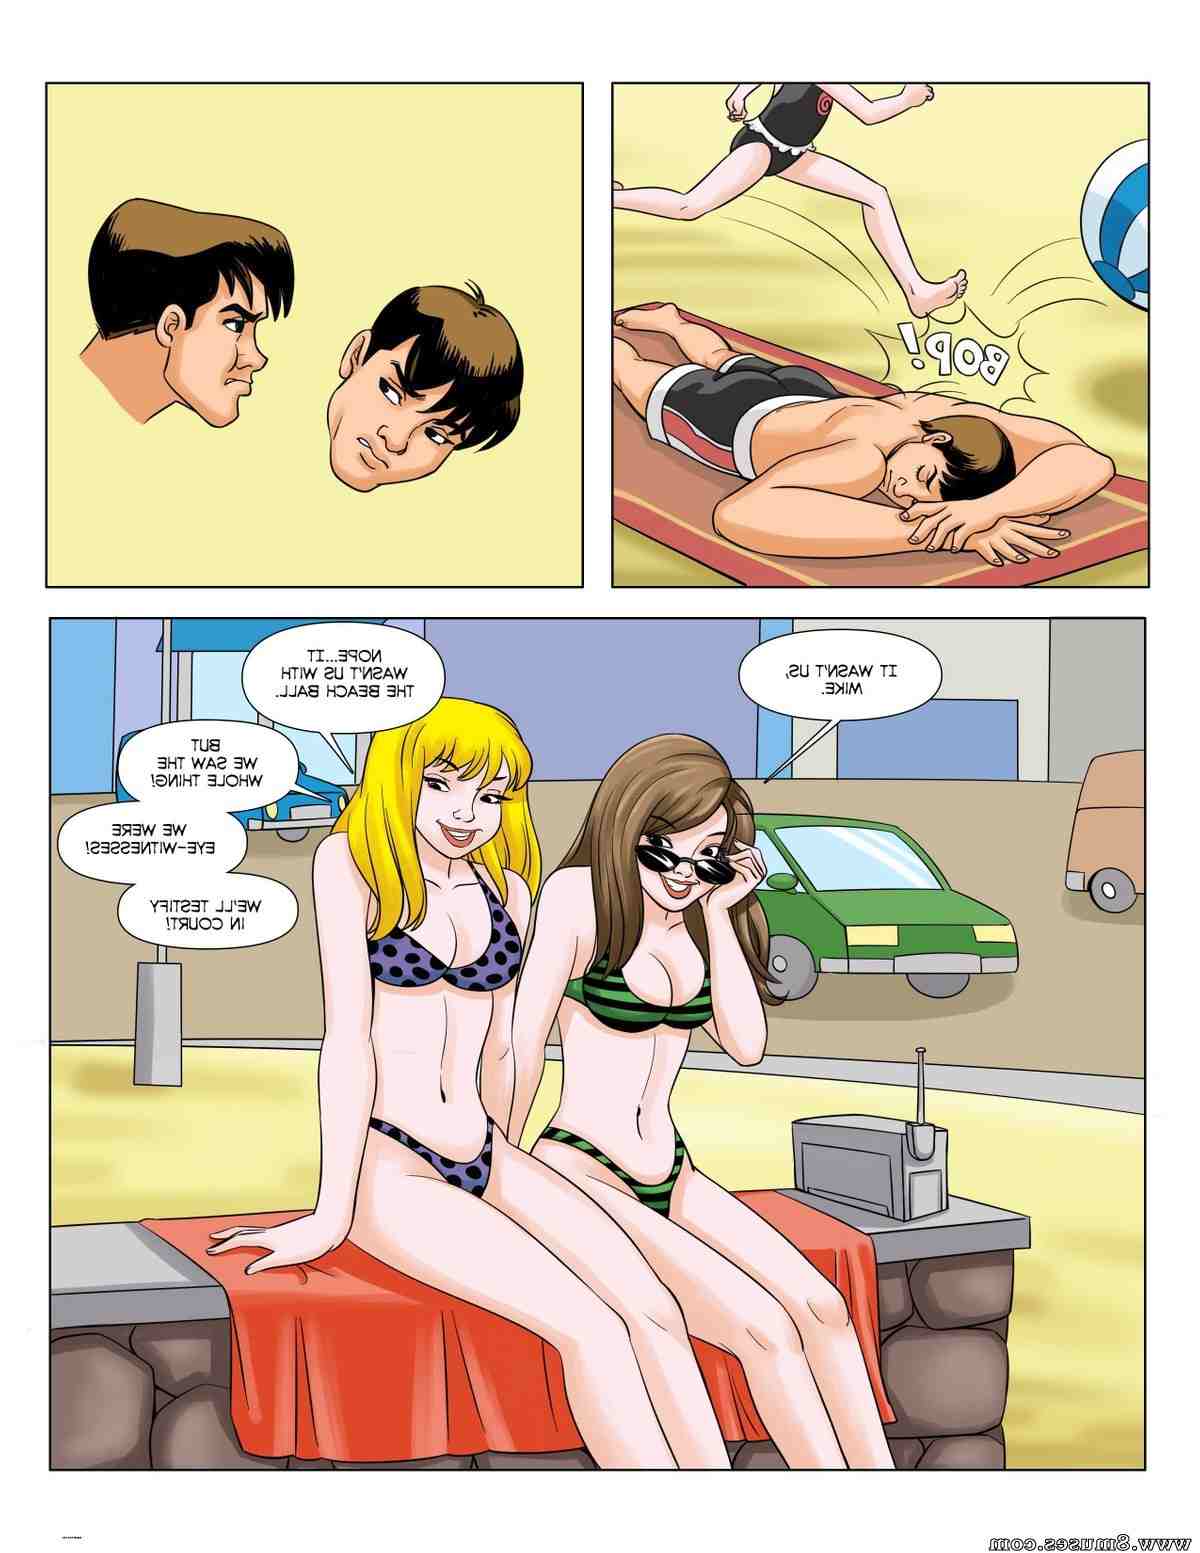 DreamTales-Comics/The-Age-Vampire The_Age_Vampire__8muses_-_Sex_and_Porn_Comics_5.jpg